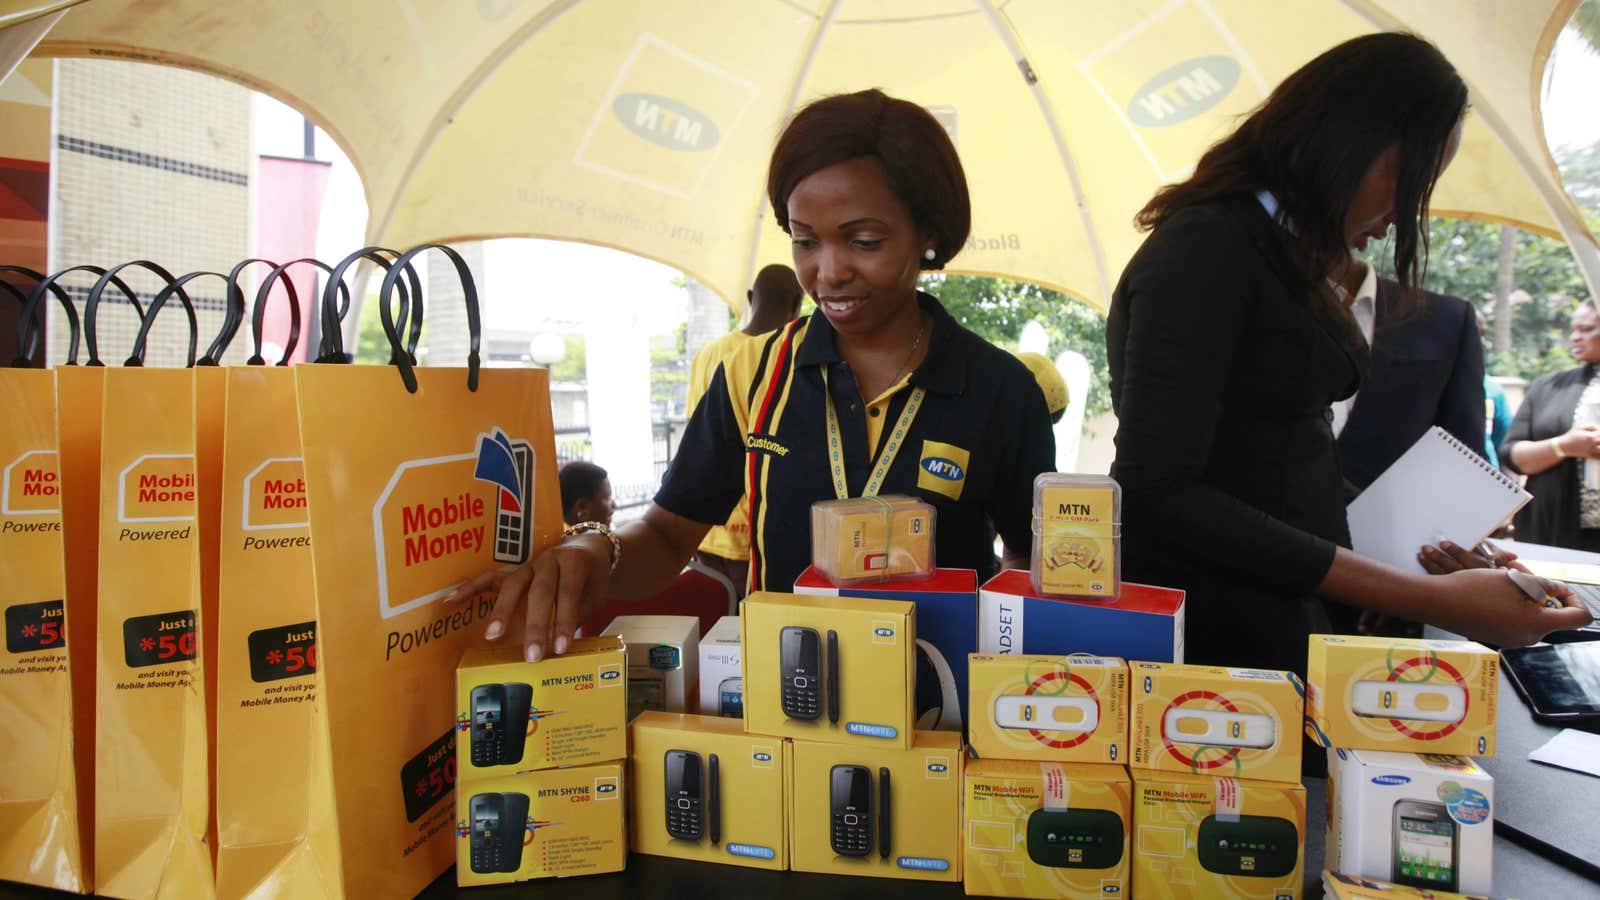 Mobile phone use has rocketed in Nigeria in the last decade but mobile money has not.